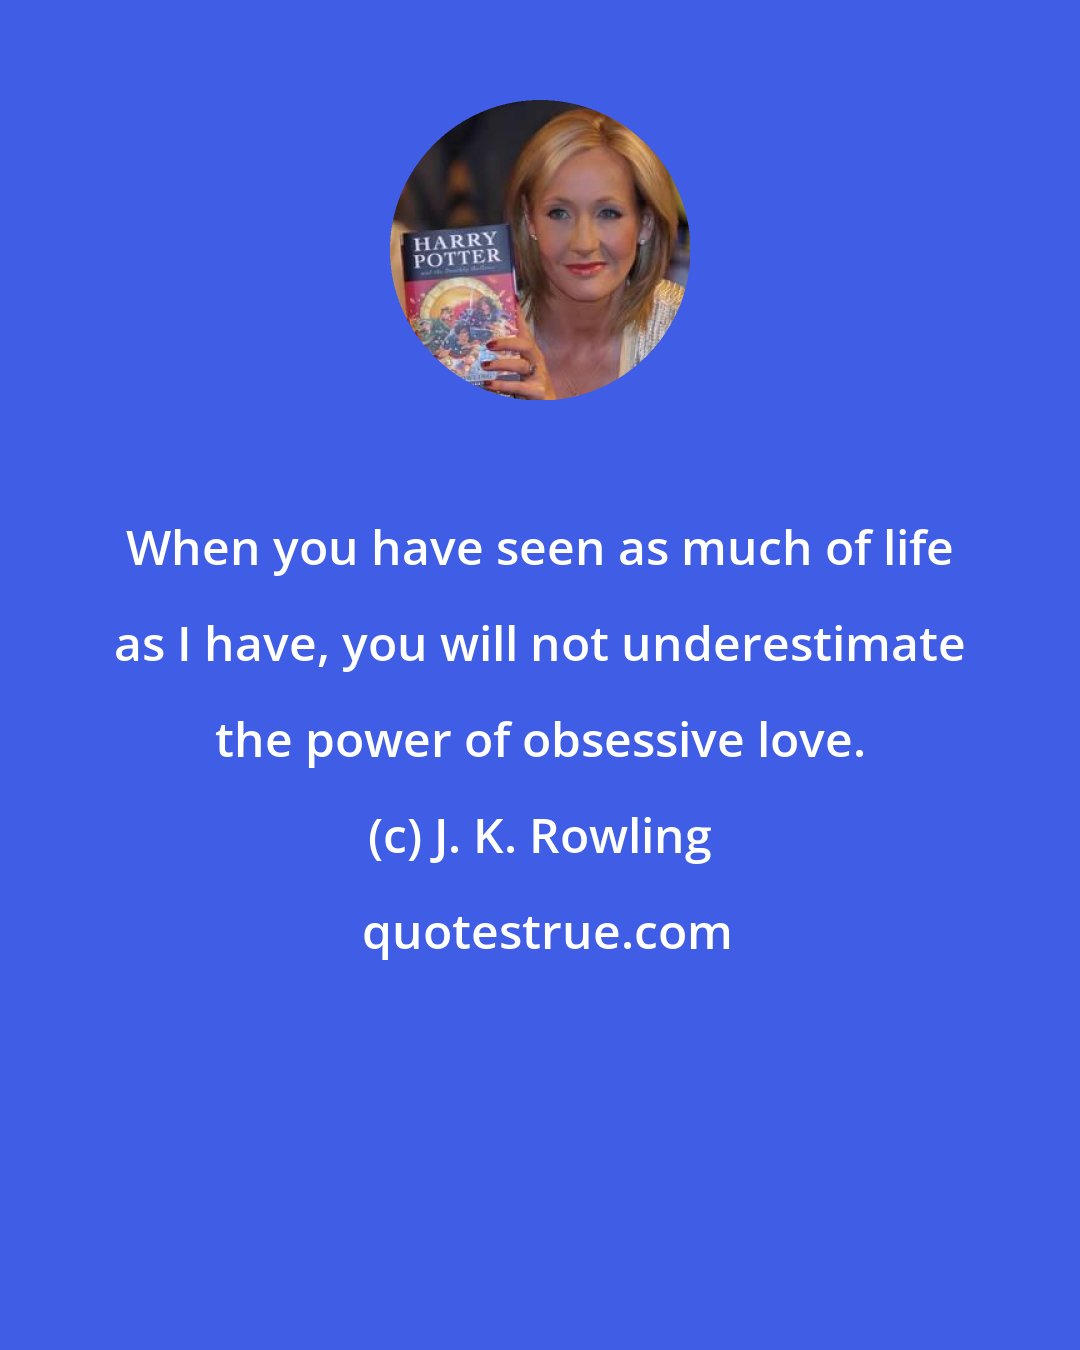 J. K. Rowling: When you have seen as much of life as I have, you will not underestimate the power of obsessive love.